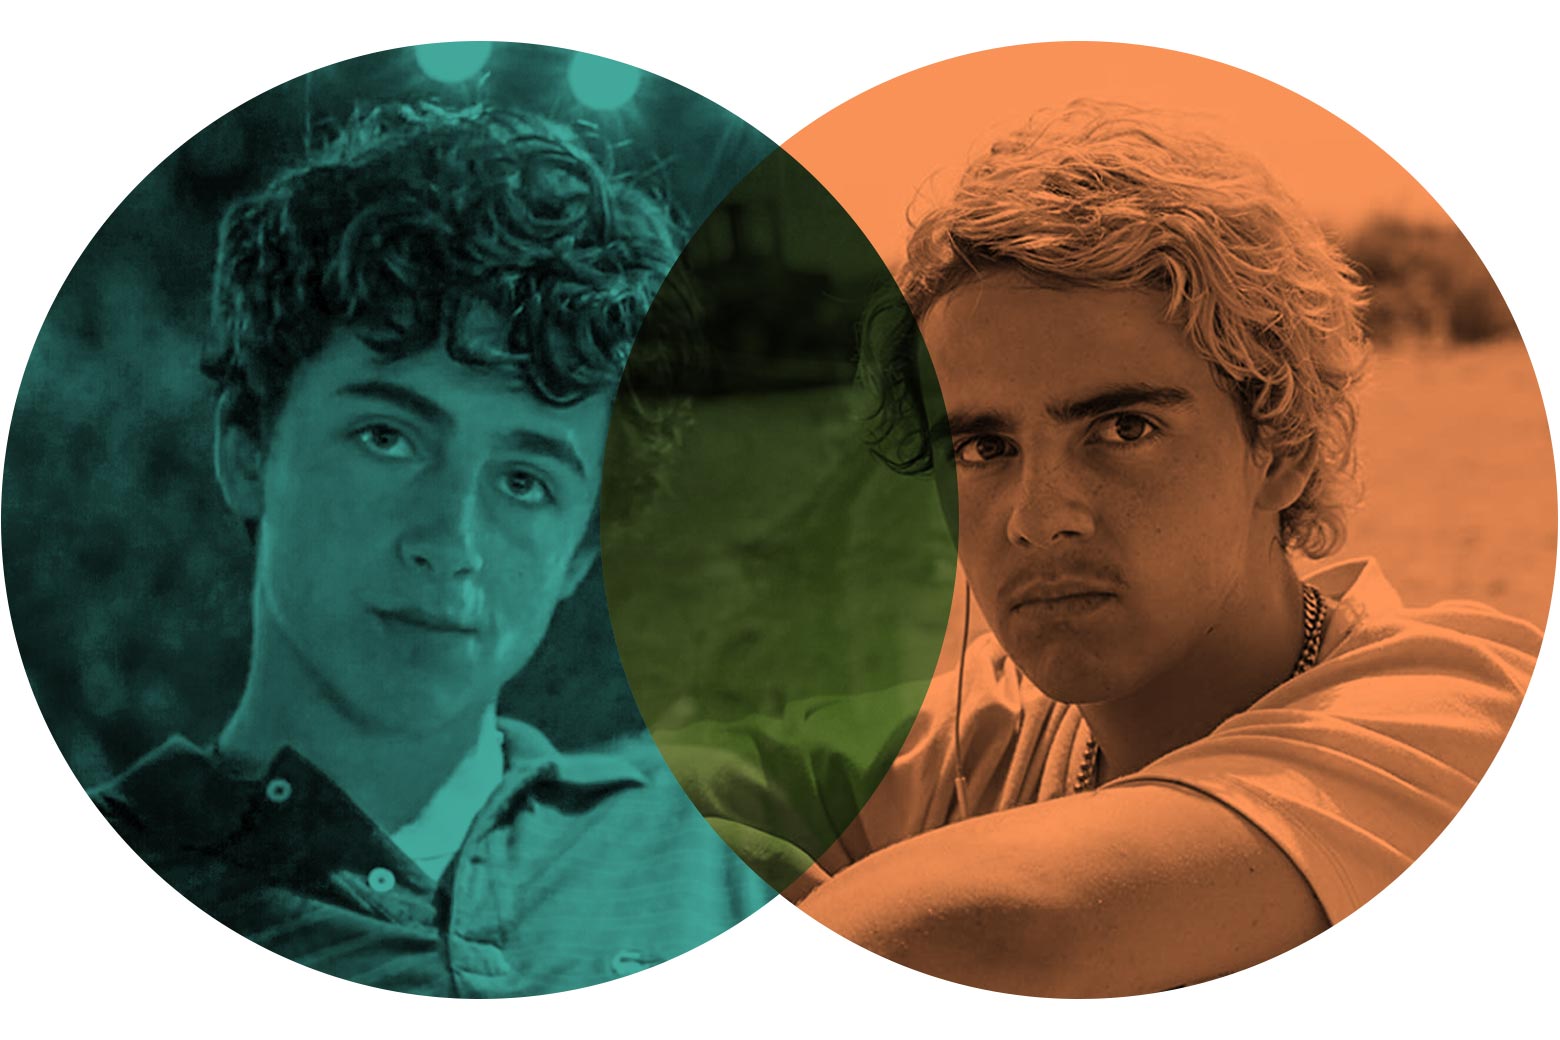 Elio's Call Me By Your Name Outfits: How to Get The Look in 2020